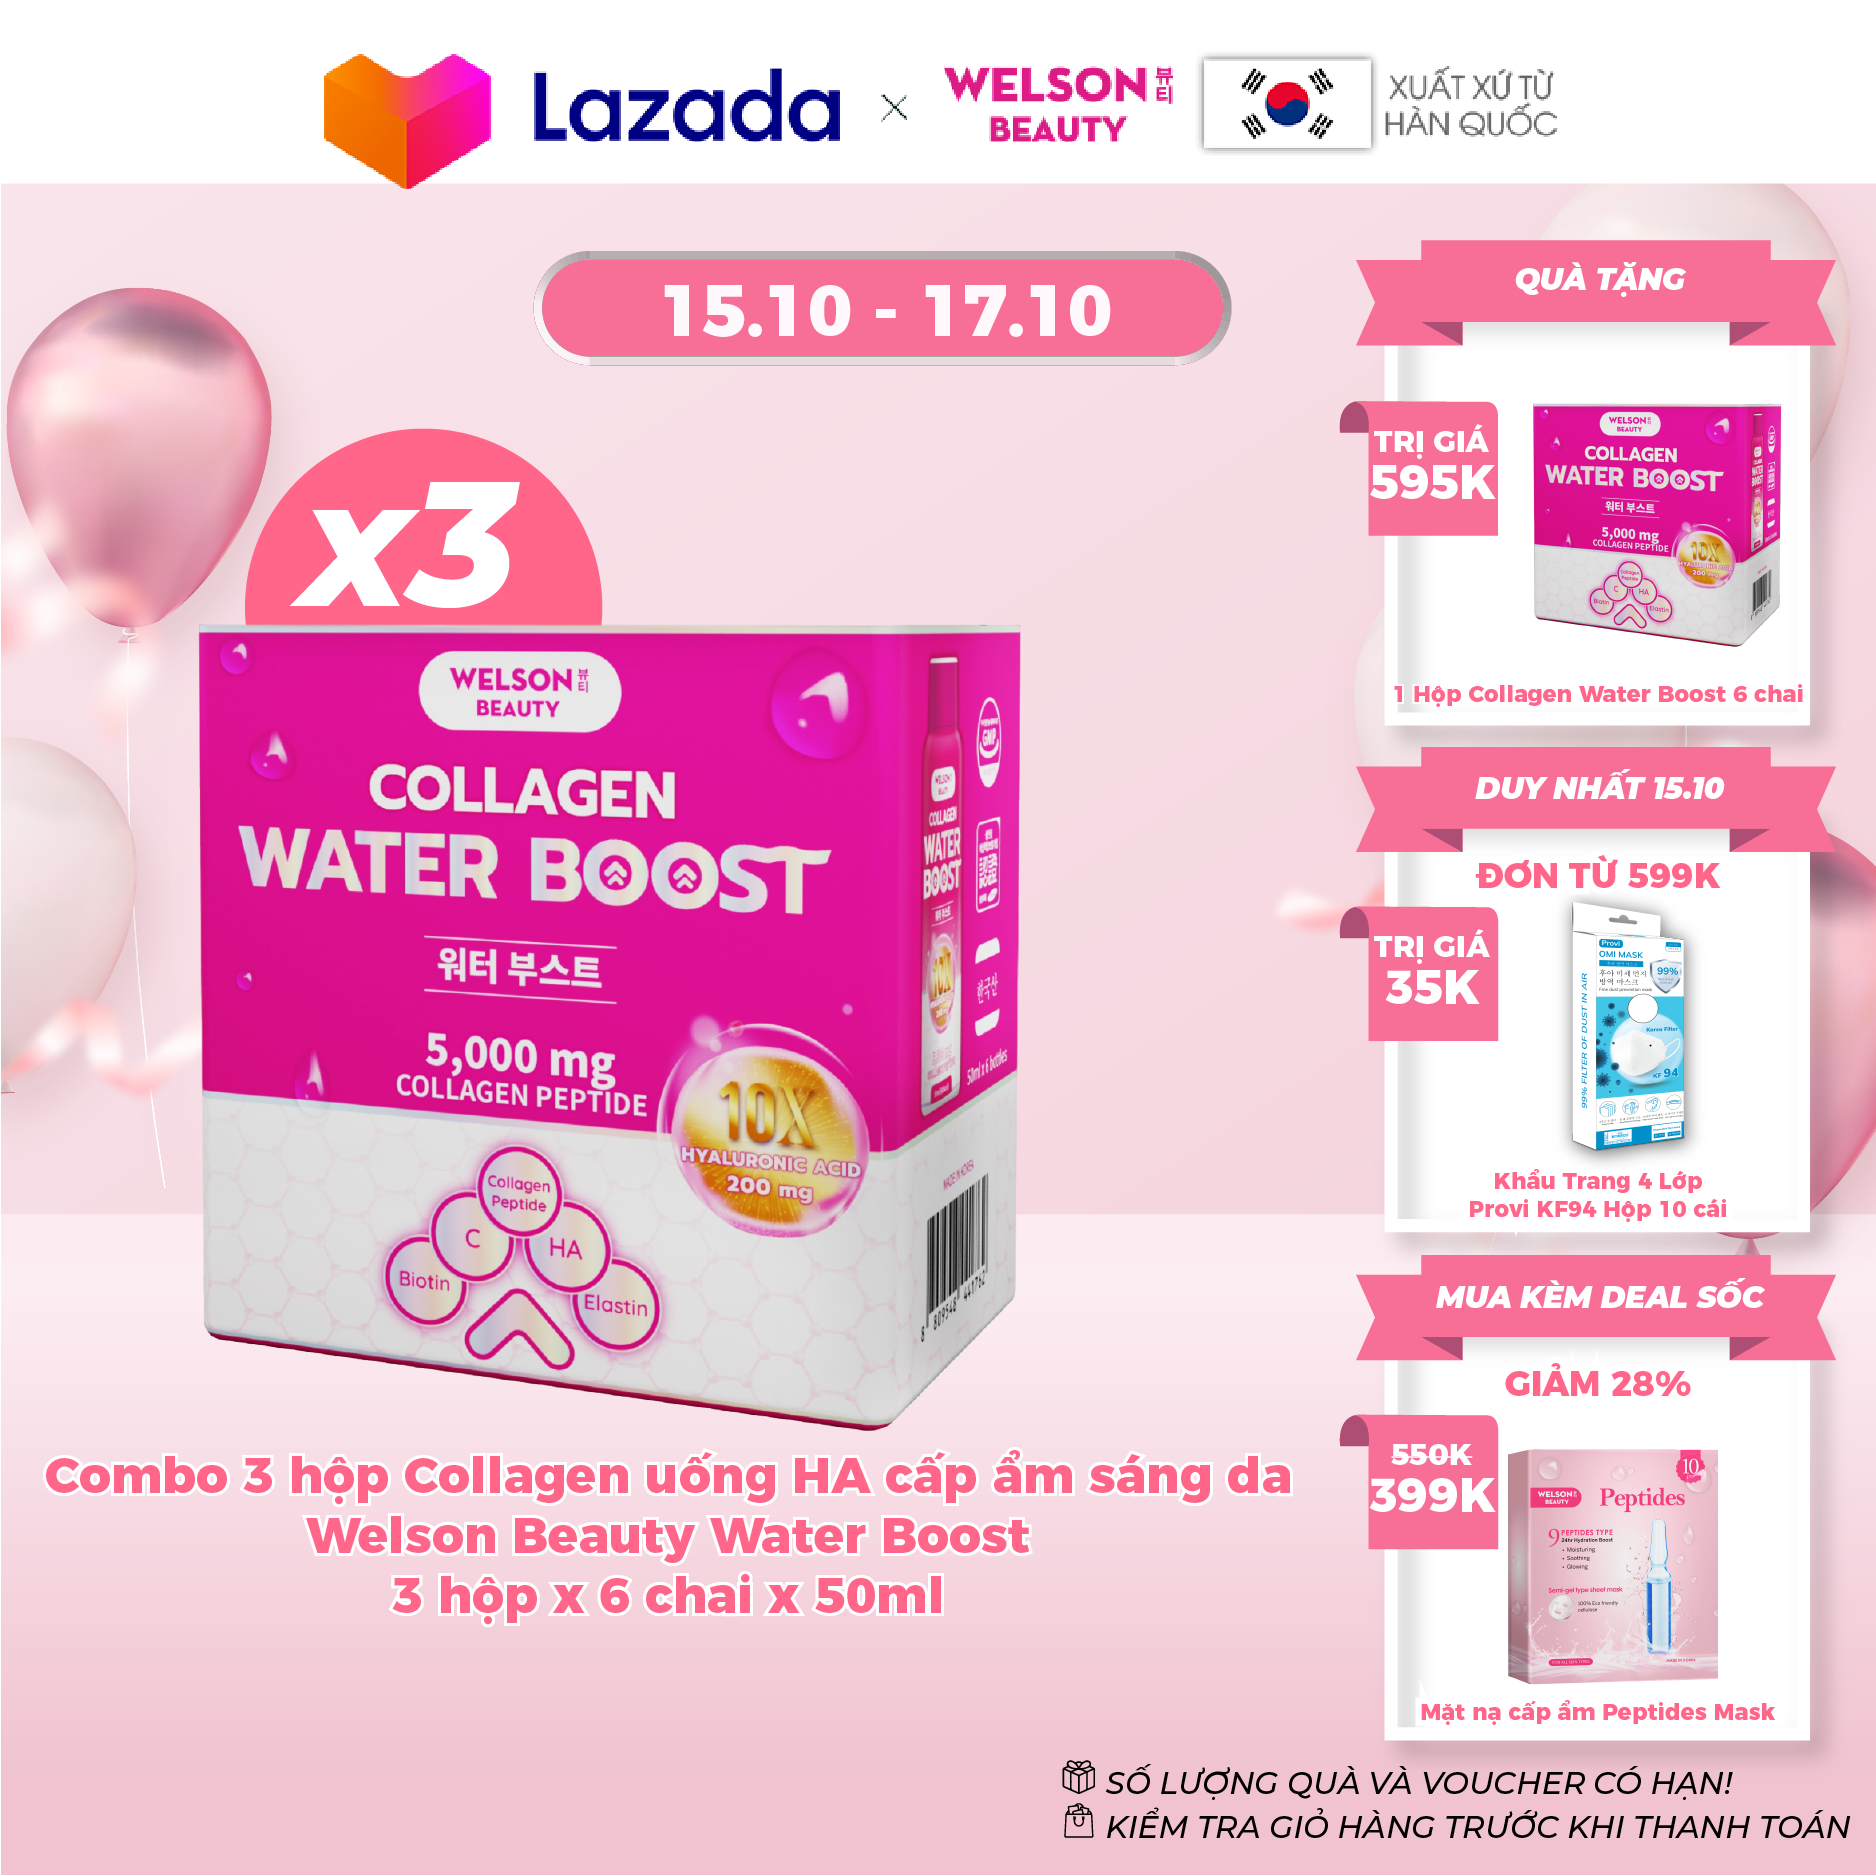 Combo 3 Hộp Collagen uống HA cấp ẩm sáng da Welson Beauty Water Boost 3 x